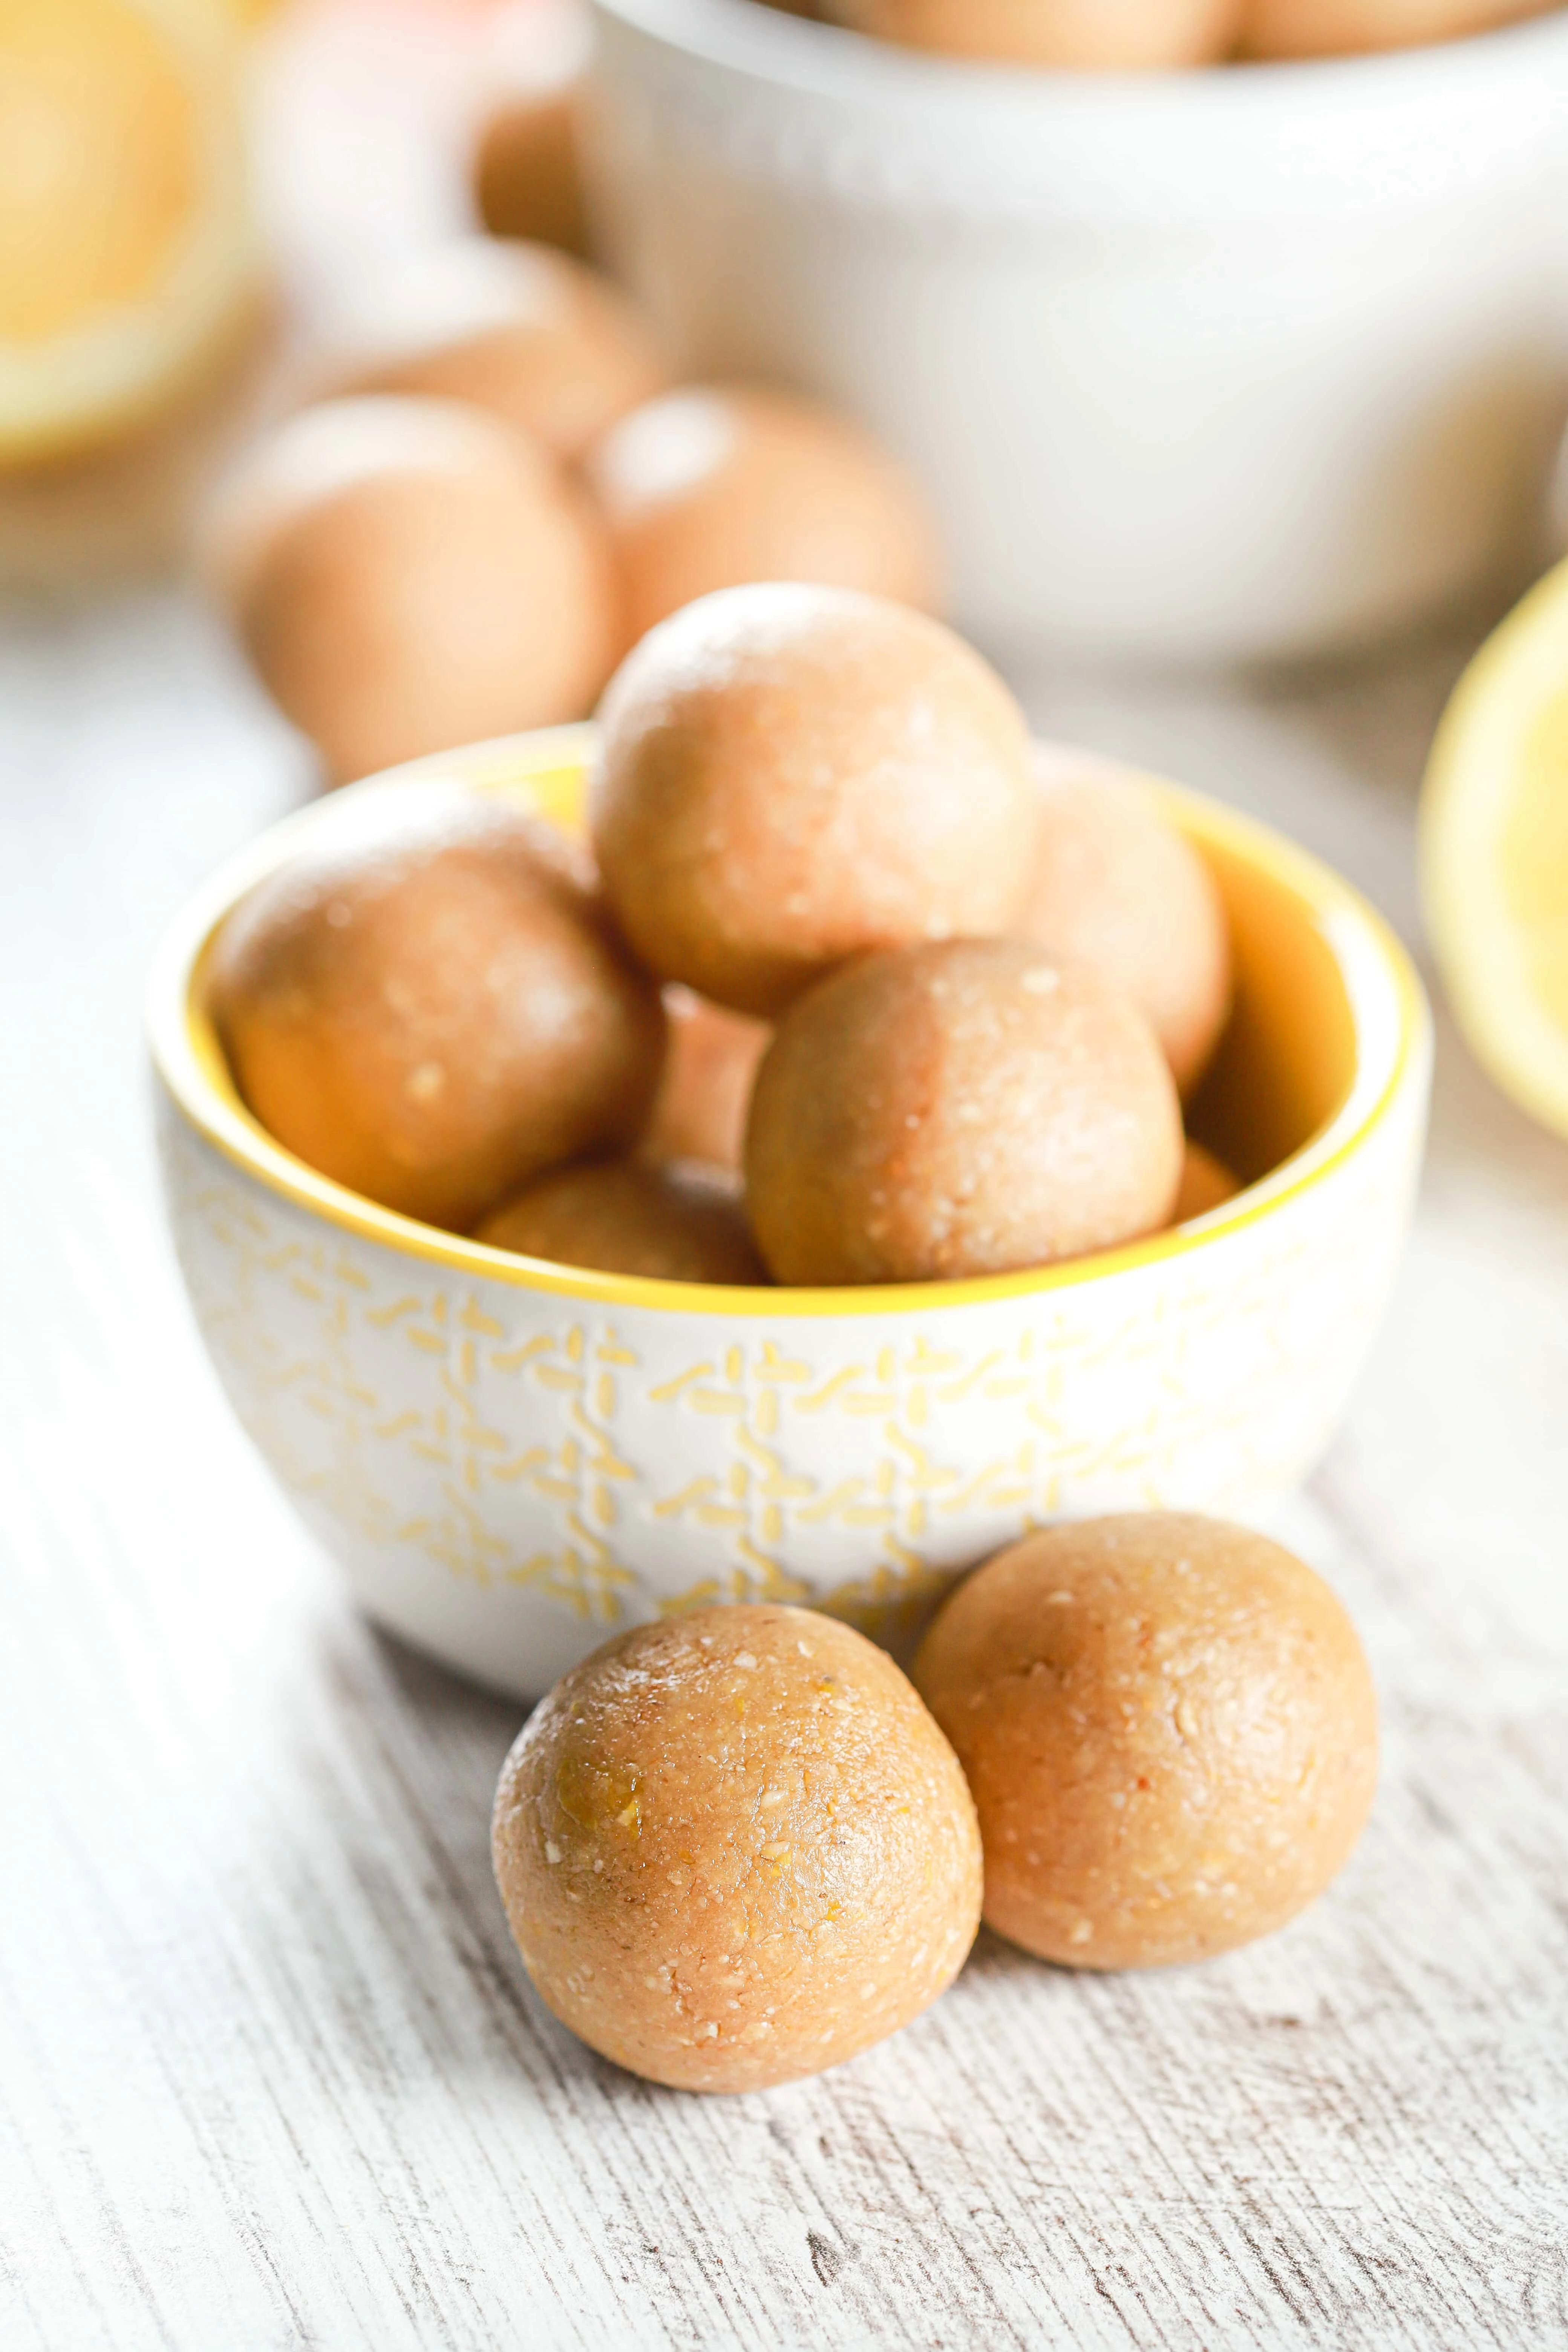 Lemon Protein Bites in a small yellow and white bowl with more bites in the background. Recipe for Lemon Protein Bites from A Kitchen Addiction